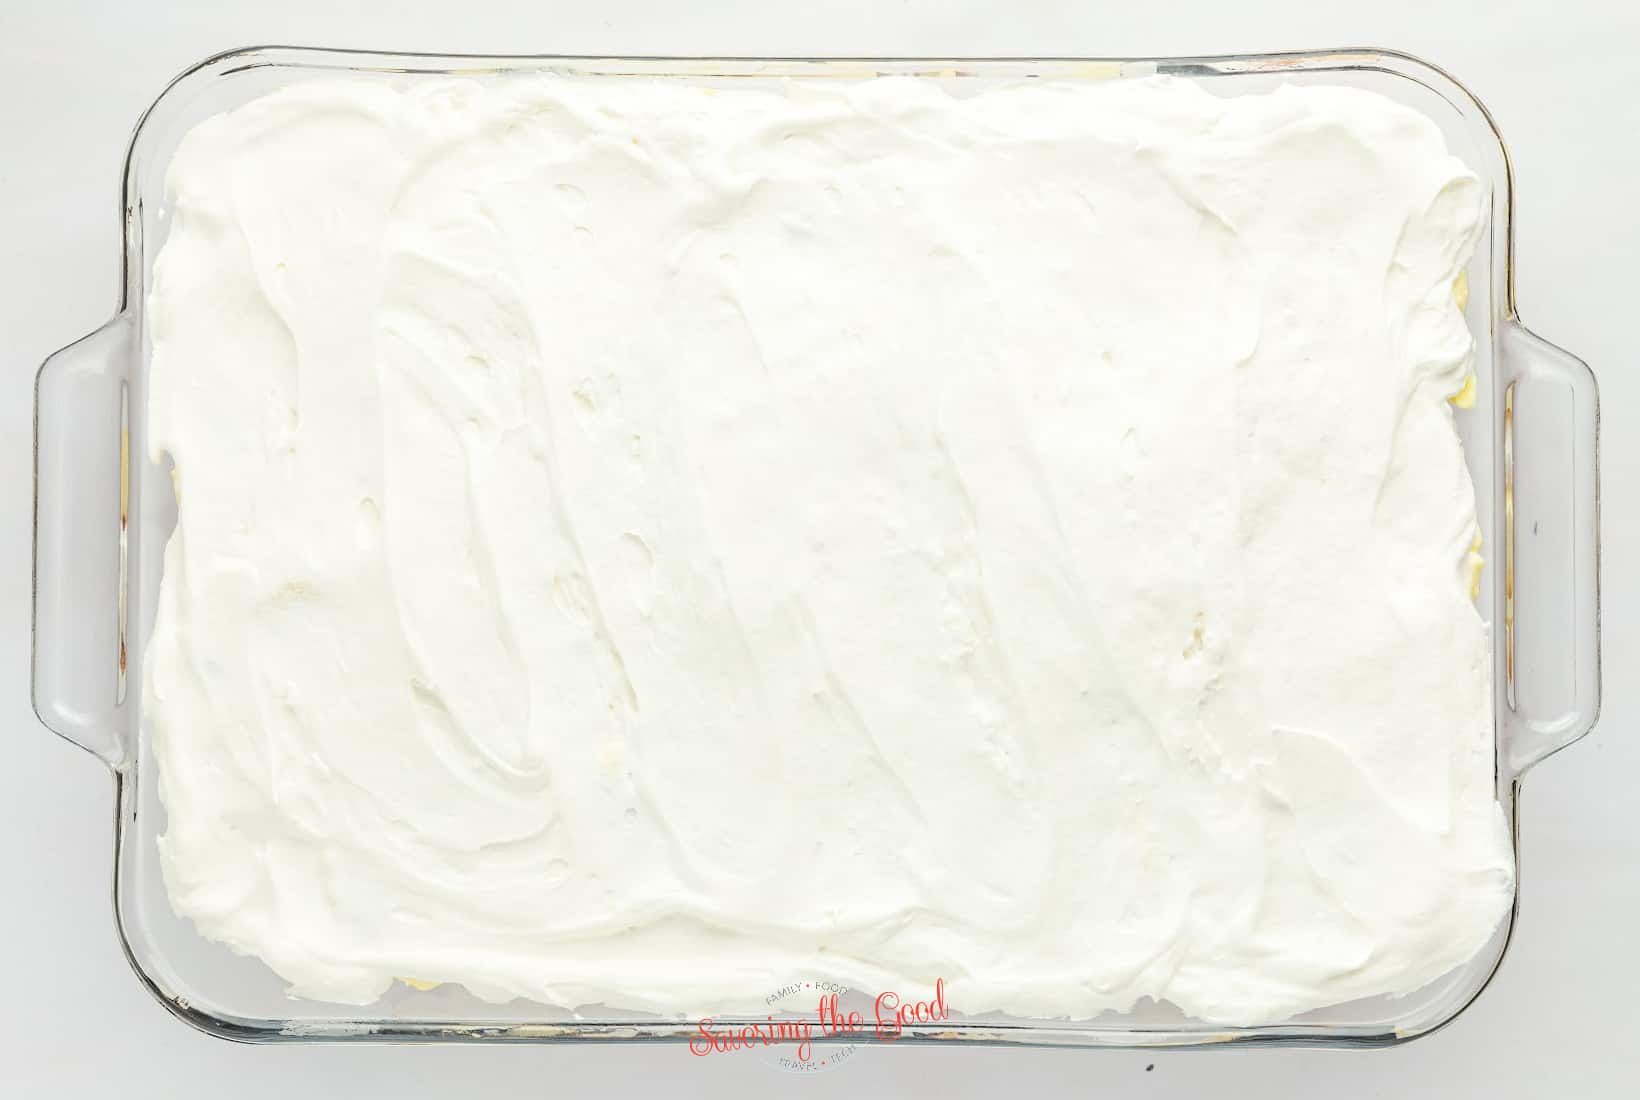 whipped topping layer added.